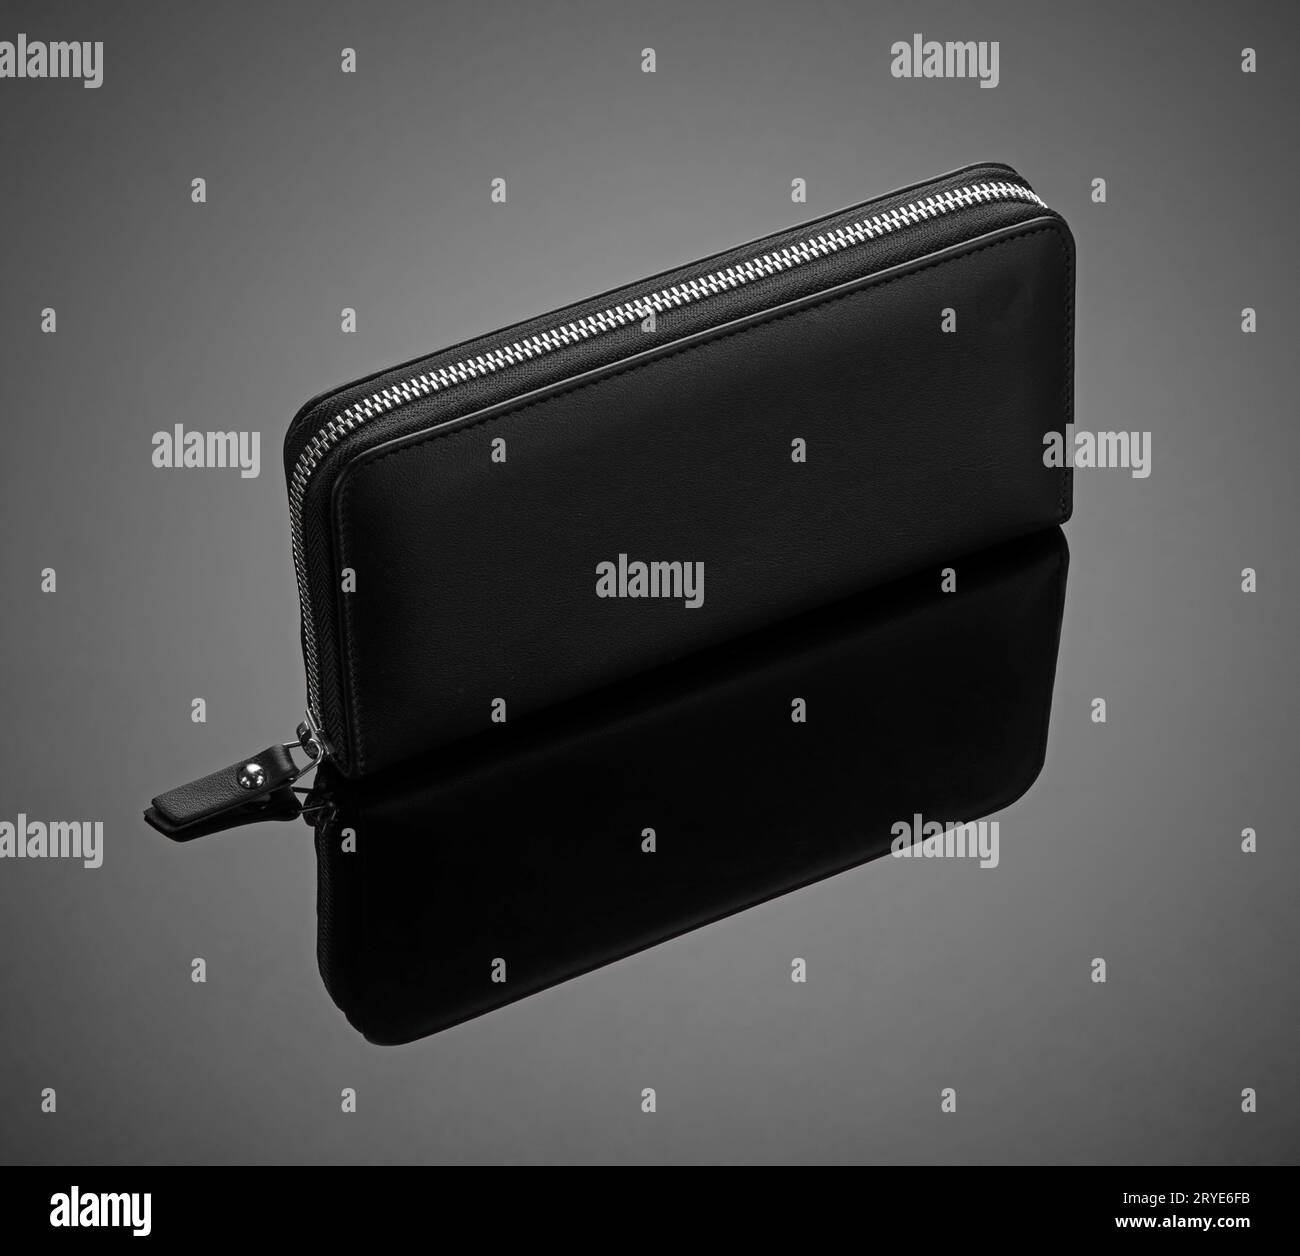 Men's wallet on a black background Stock Photo